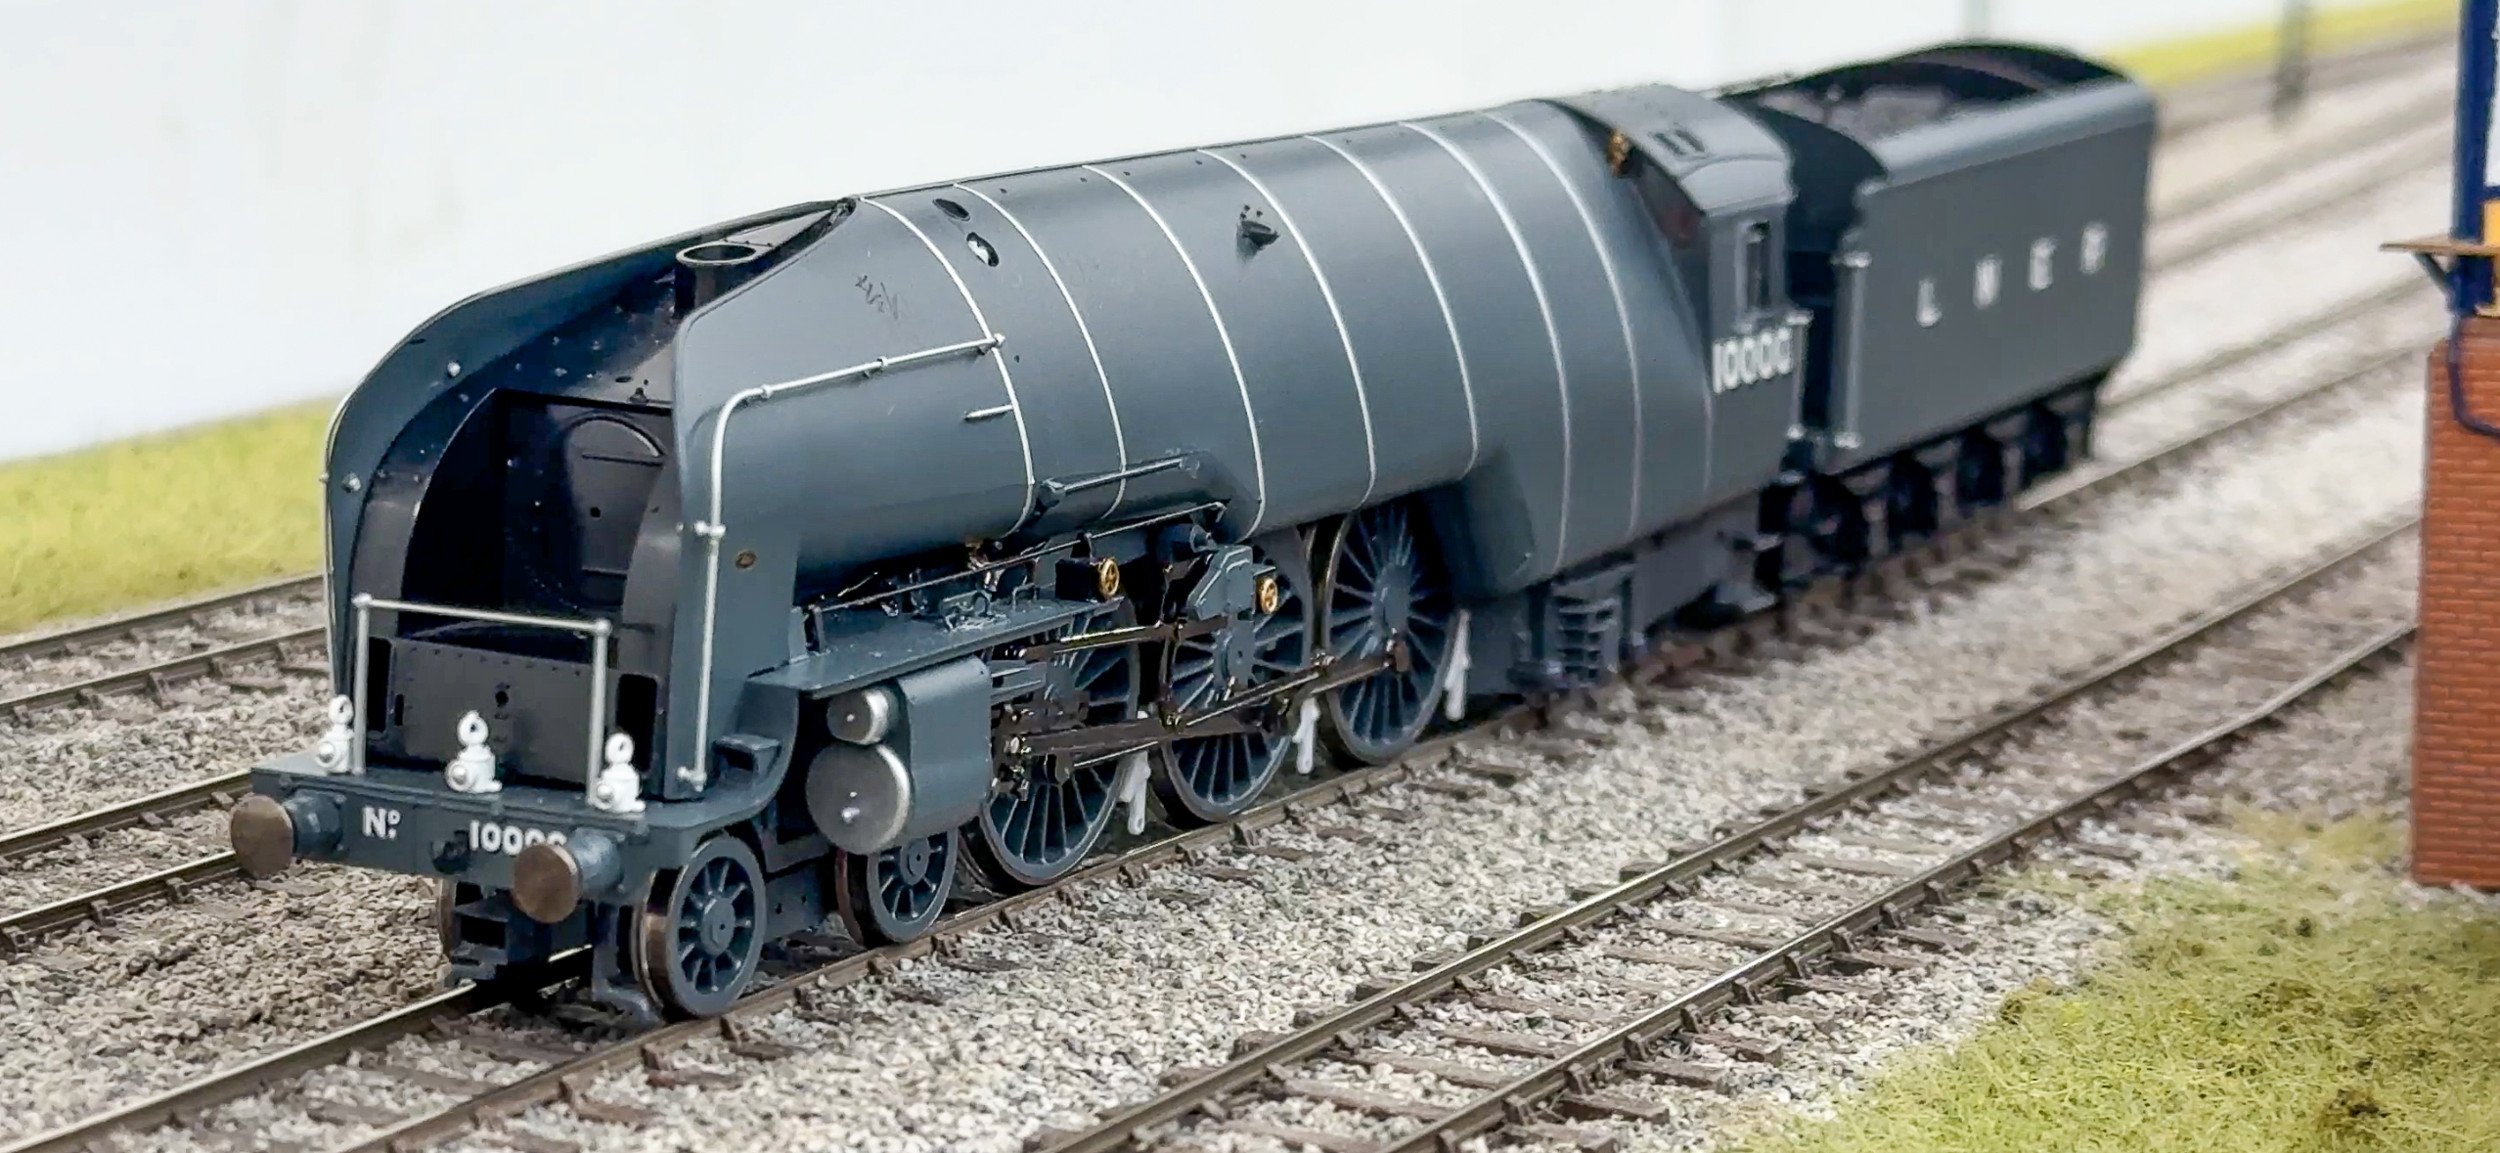 Gresley's unusual W1 4-6-4 high pressure steam locomotive is set to benefit from the addition of a smoke generator.